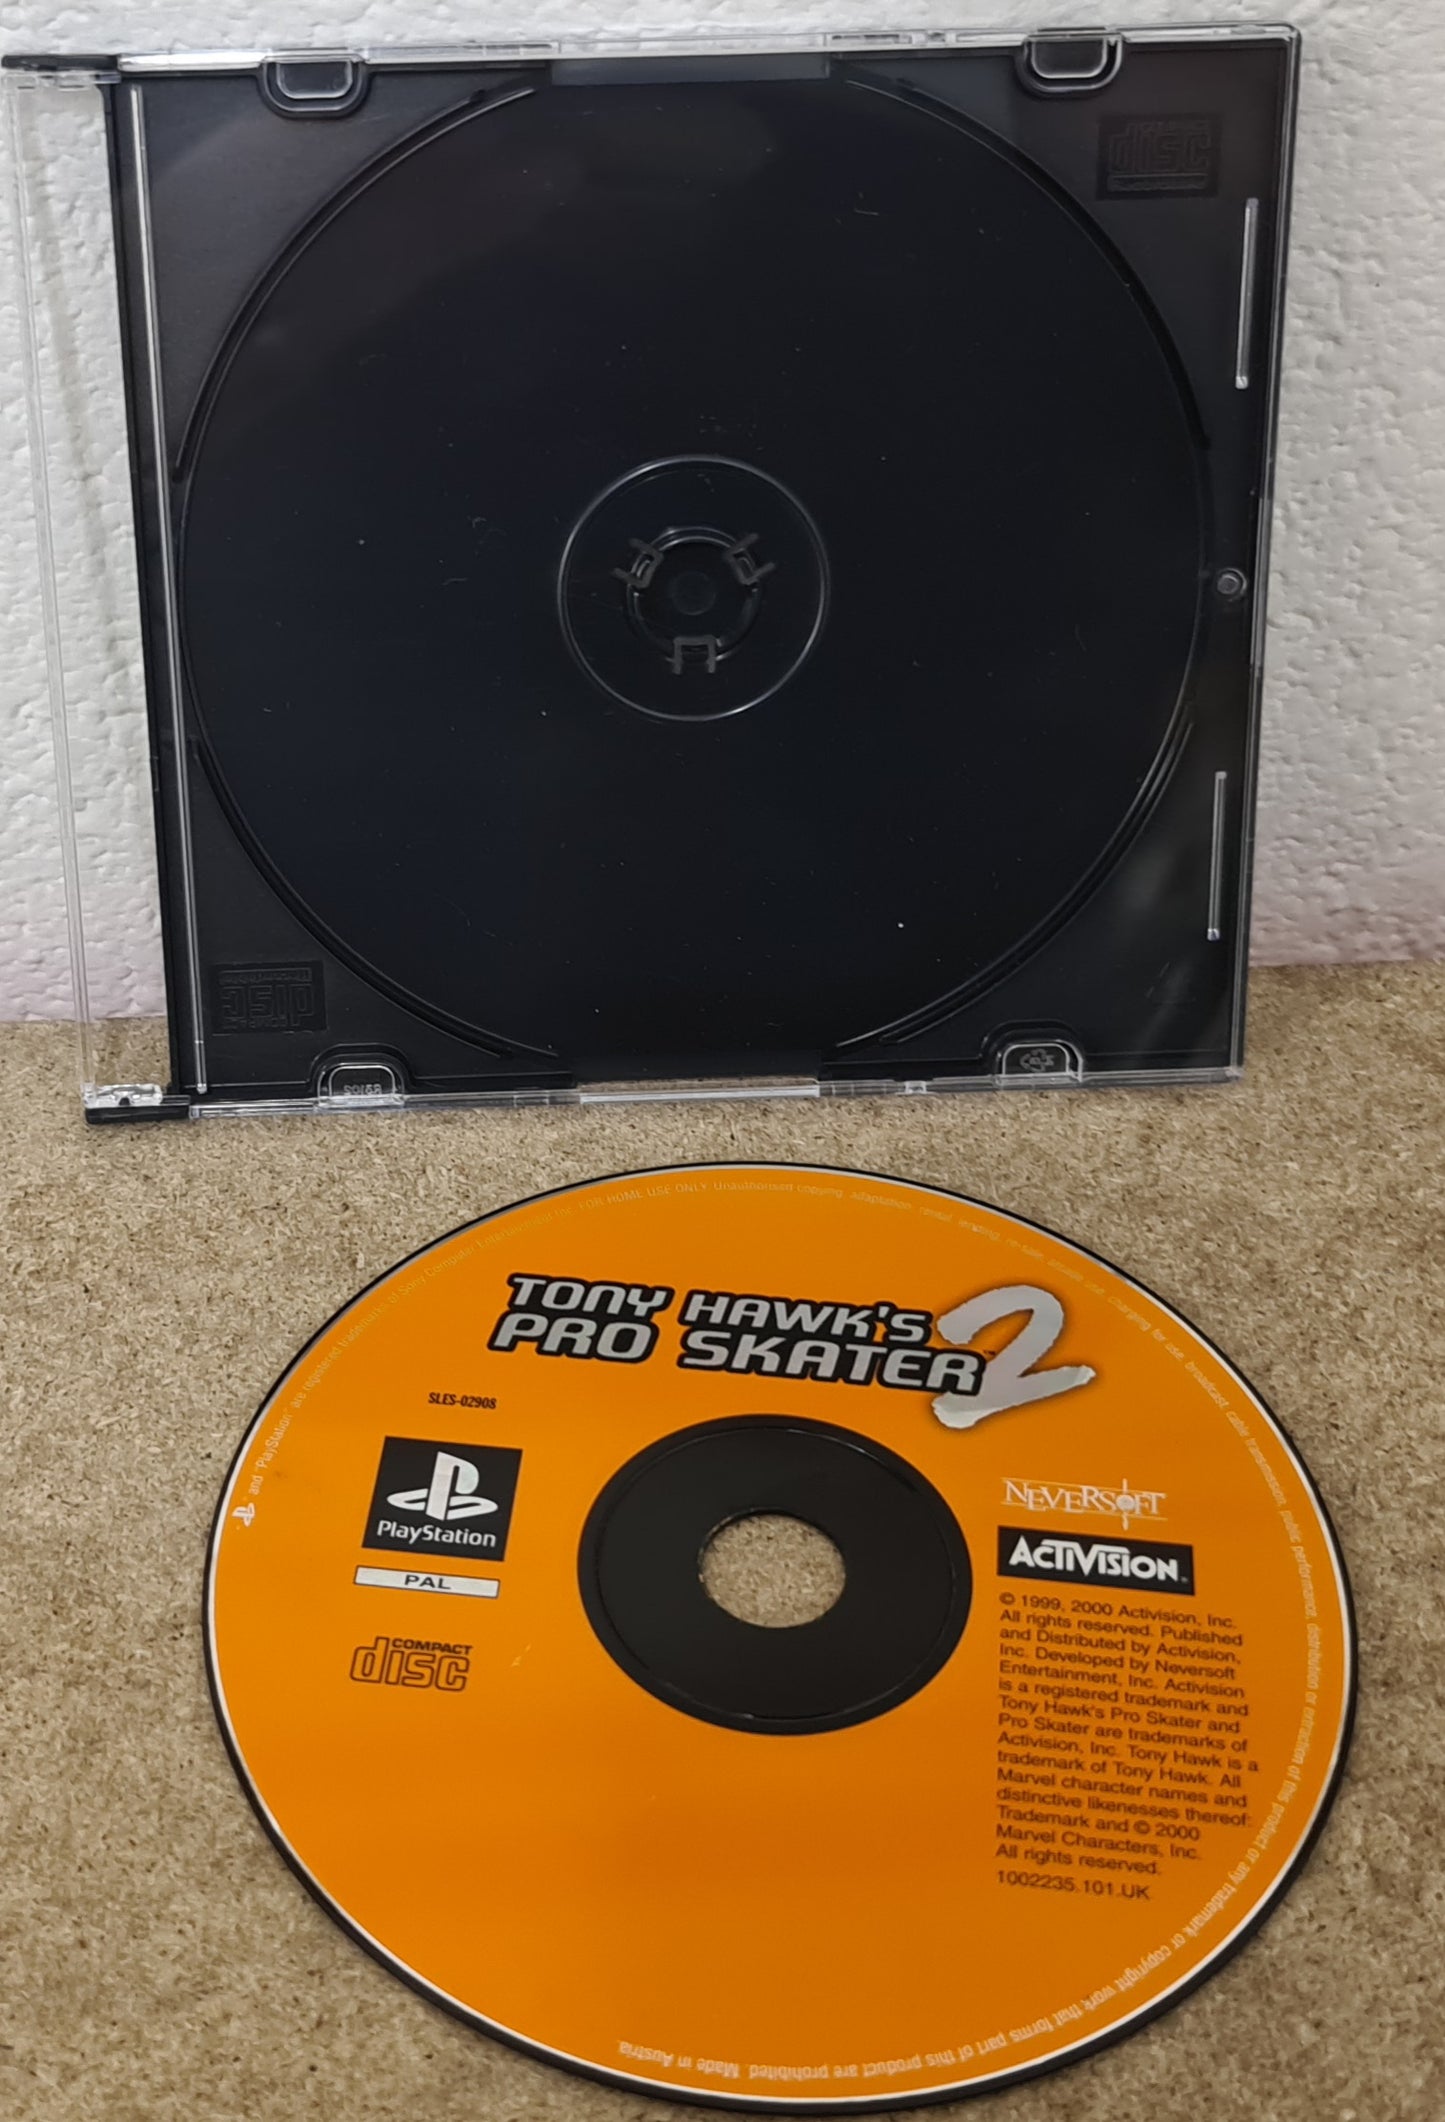 Tony Hawk's Pro Skater 2 Sony Playstation 1 (PS1) Game Disc Only